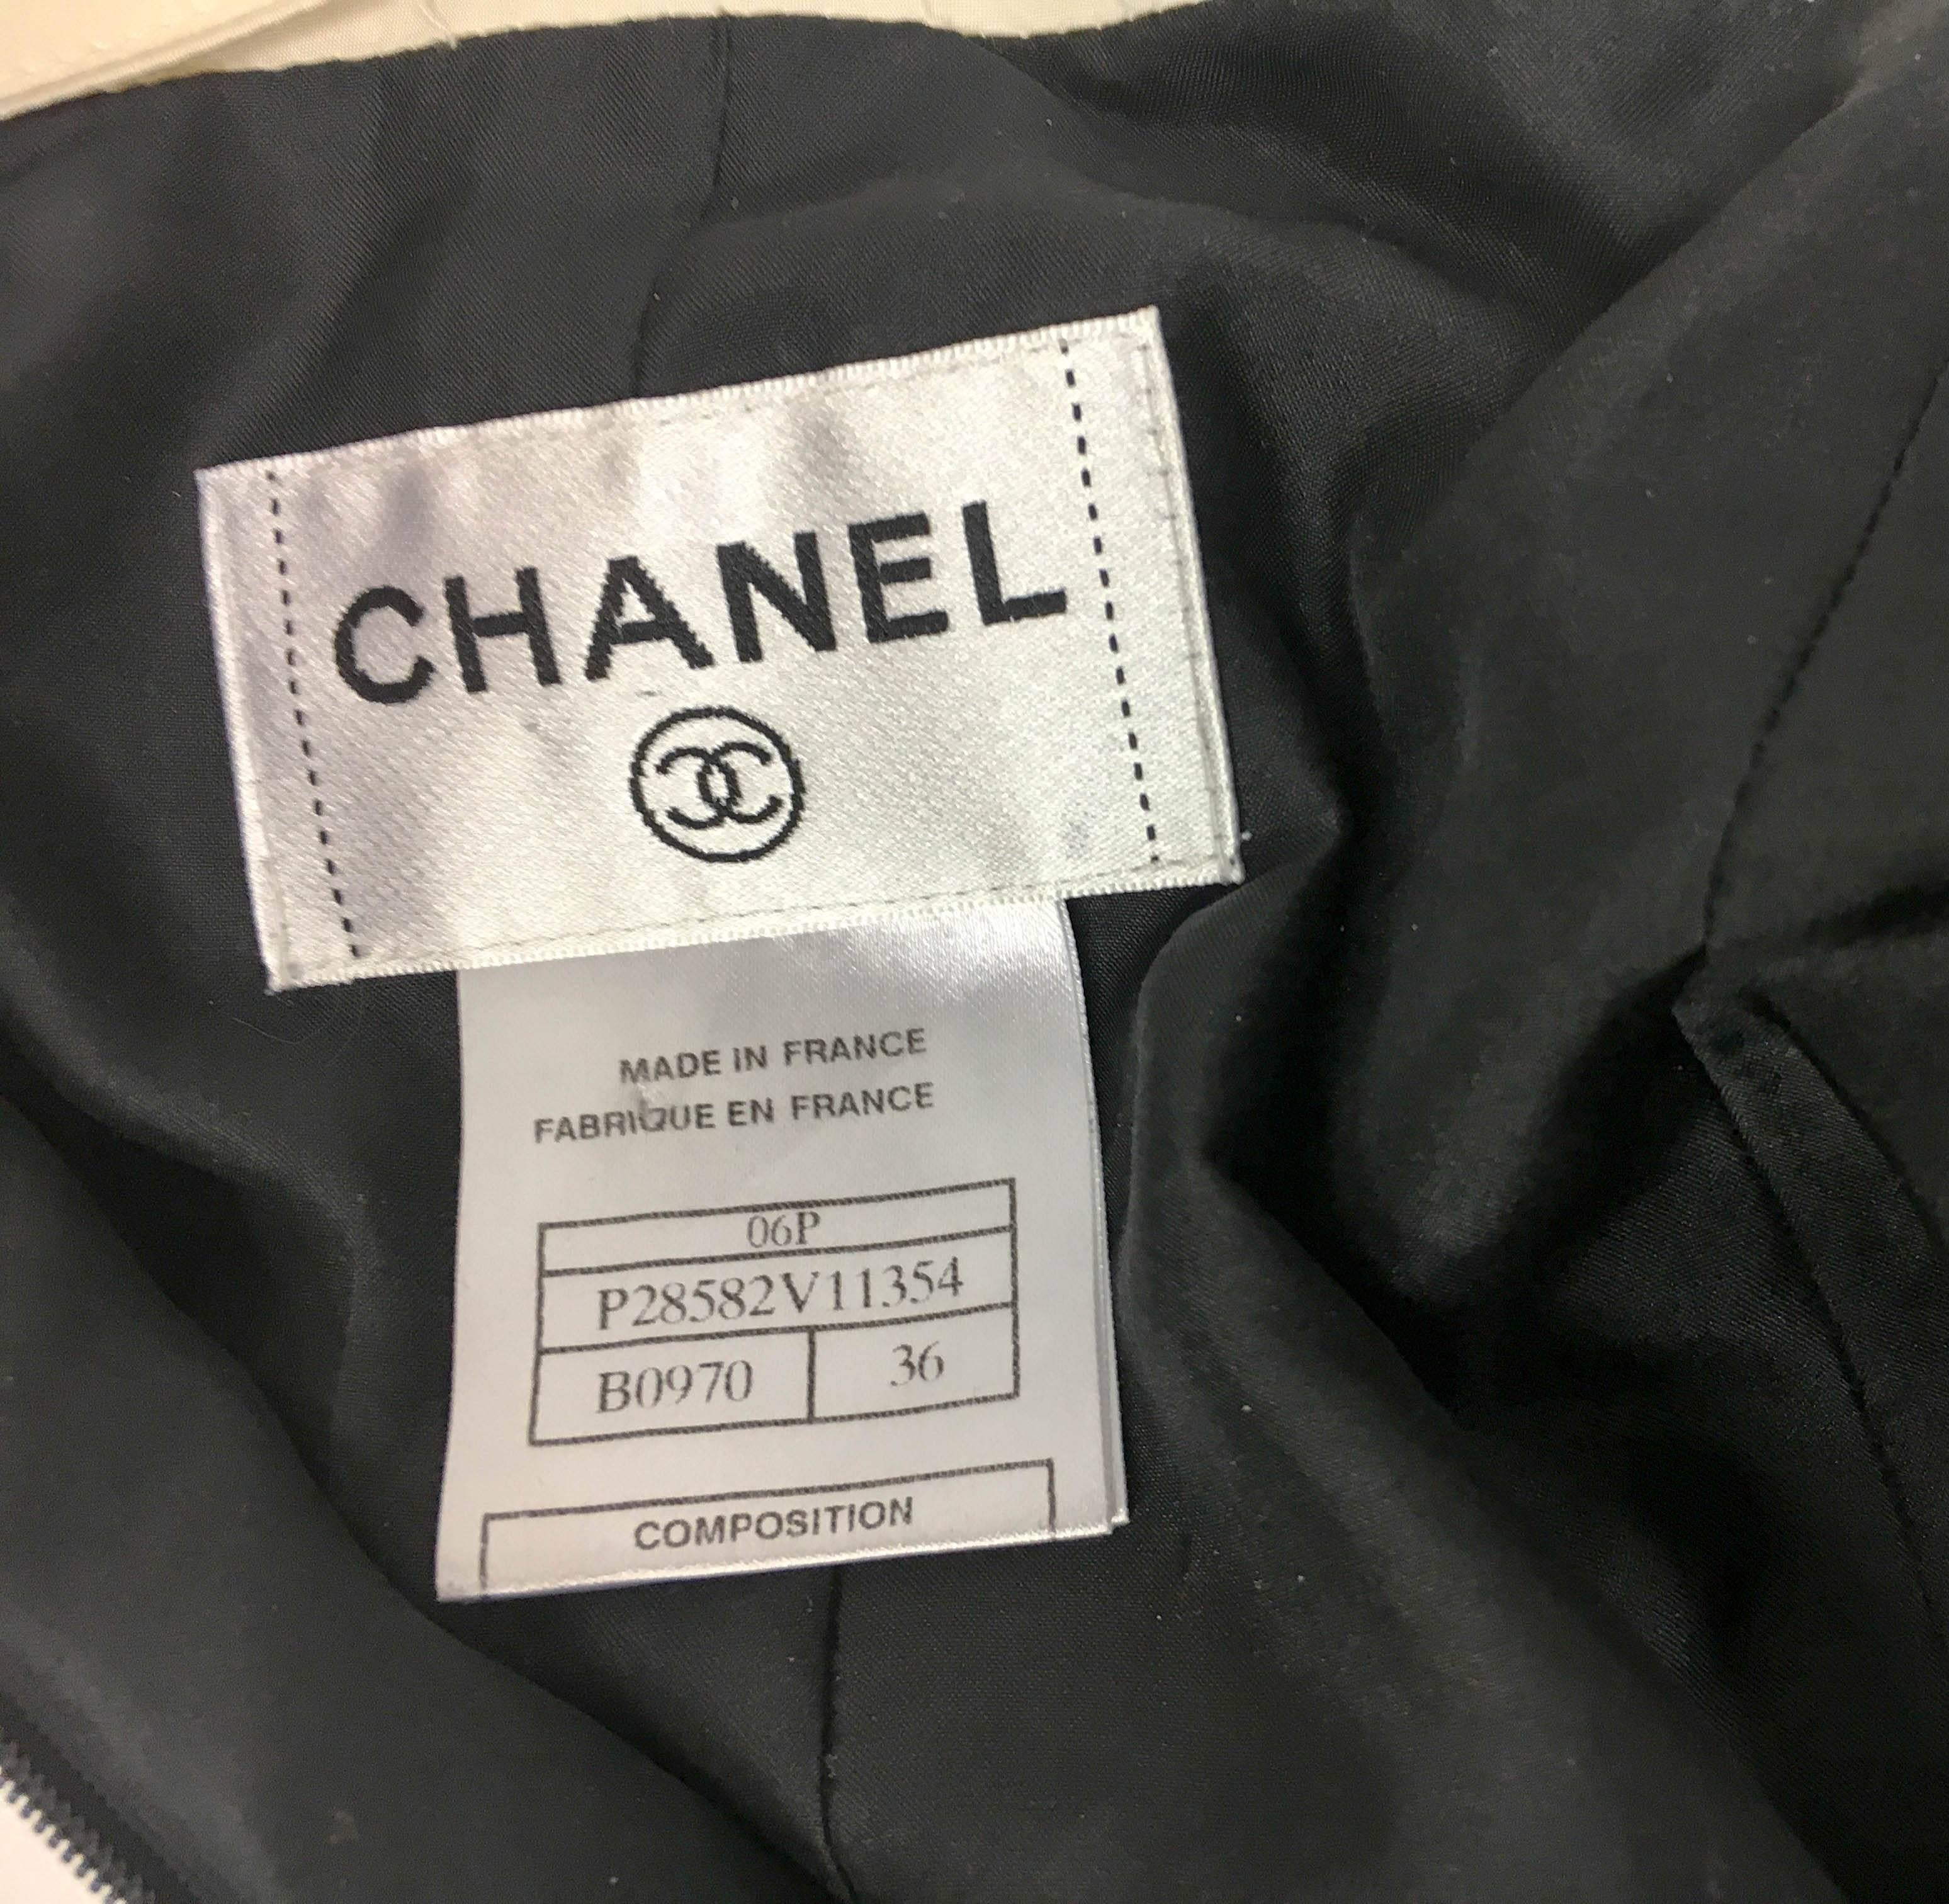 2006 Chanel Black and White Silk Cocktail Dress For Sale 6